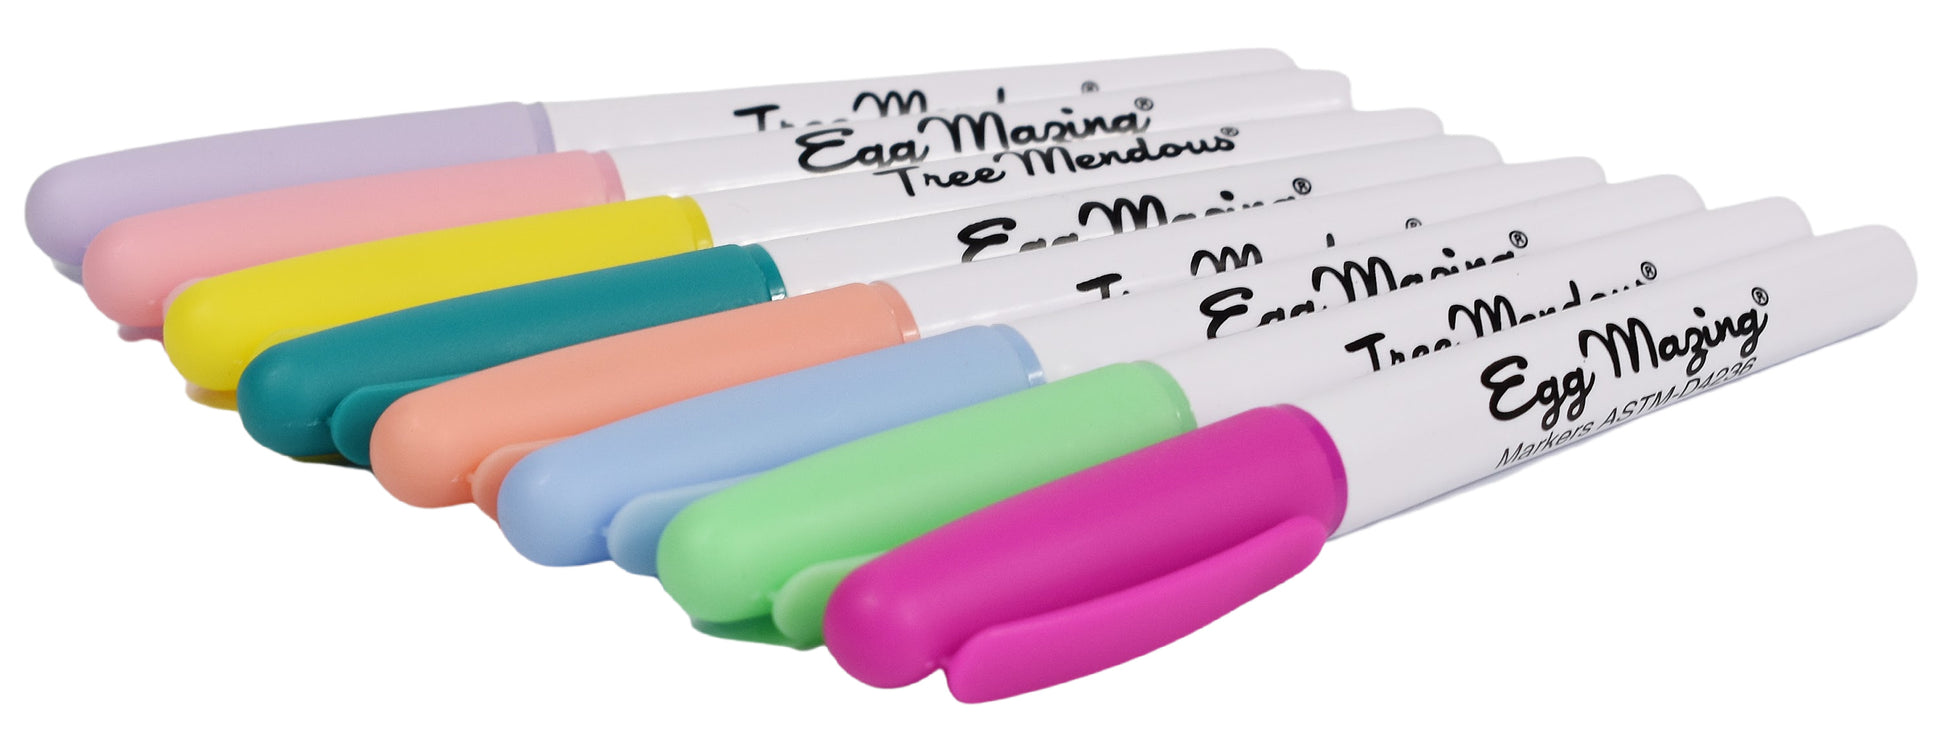 Close up image of 8 colorful markers. Colors include bright pink, mint green, light blue, peach, turquoise, yellow, light pink, and light purple. 